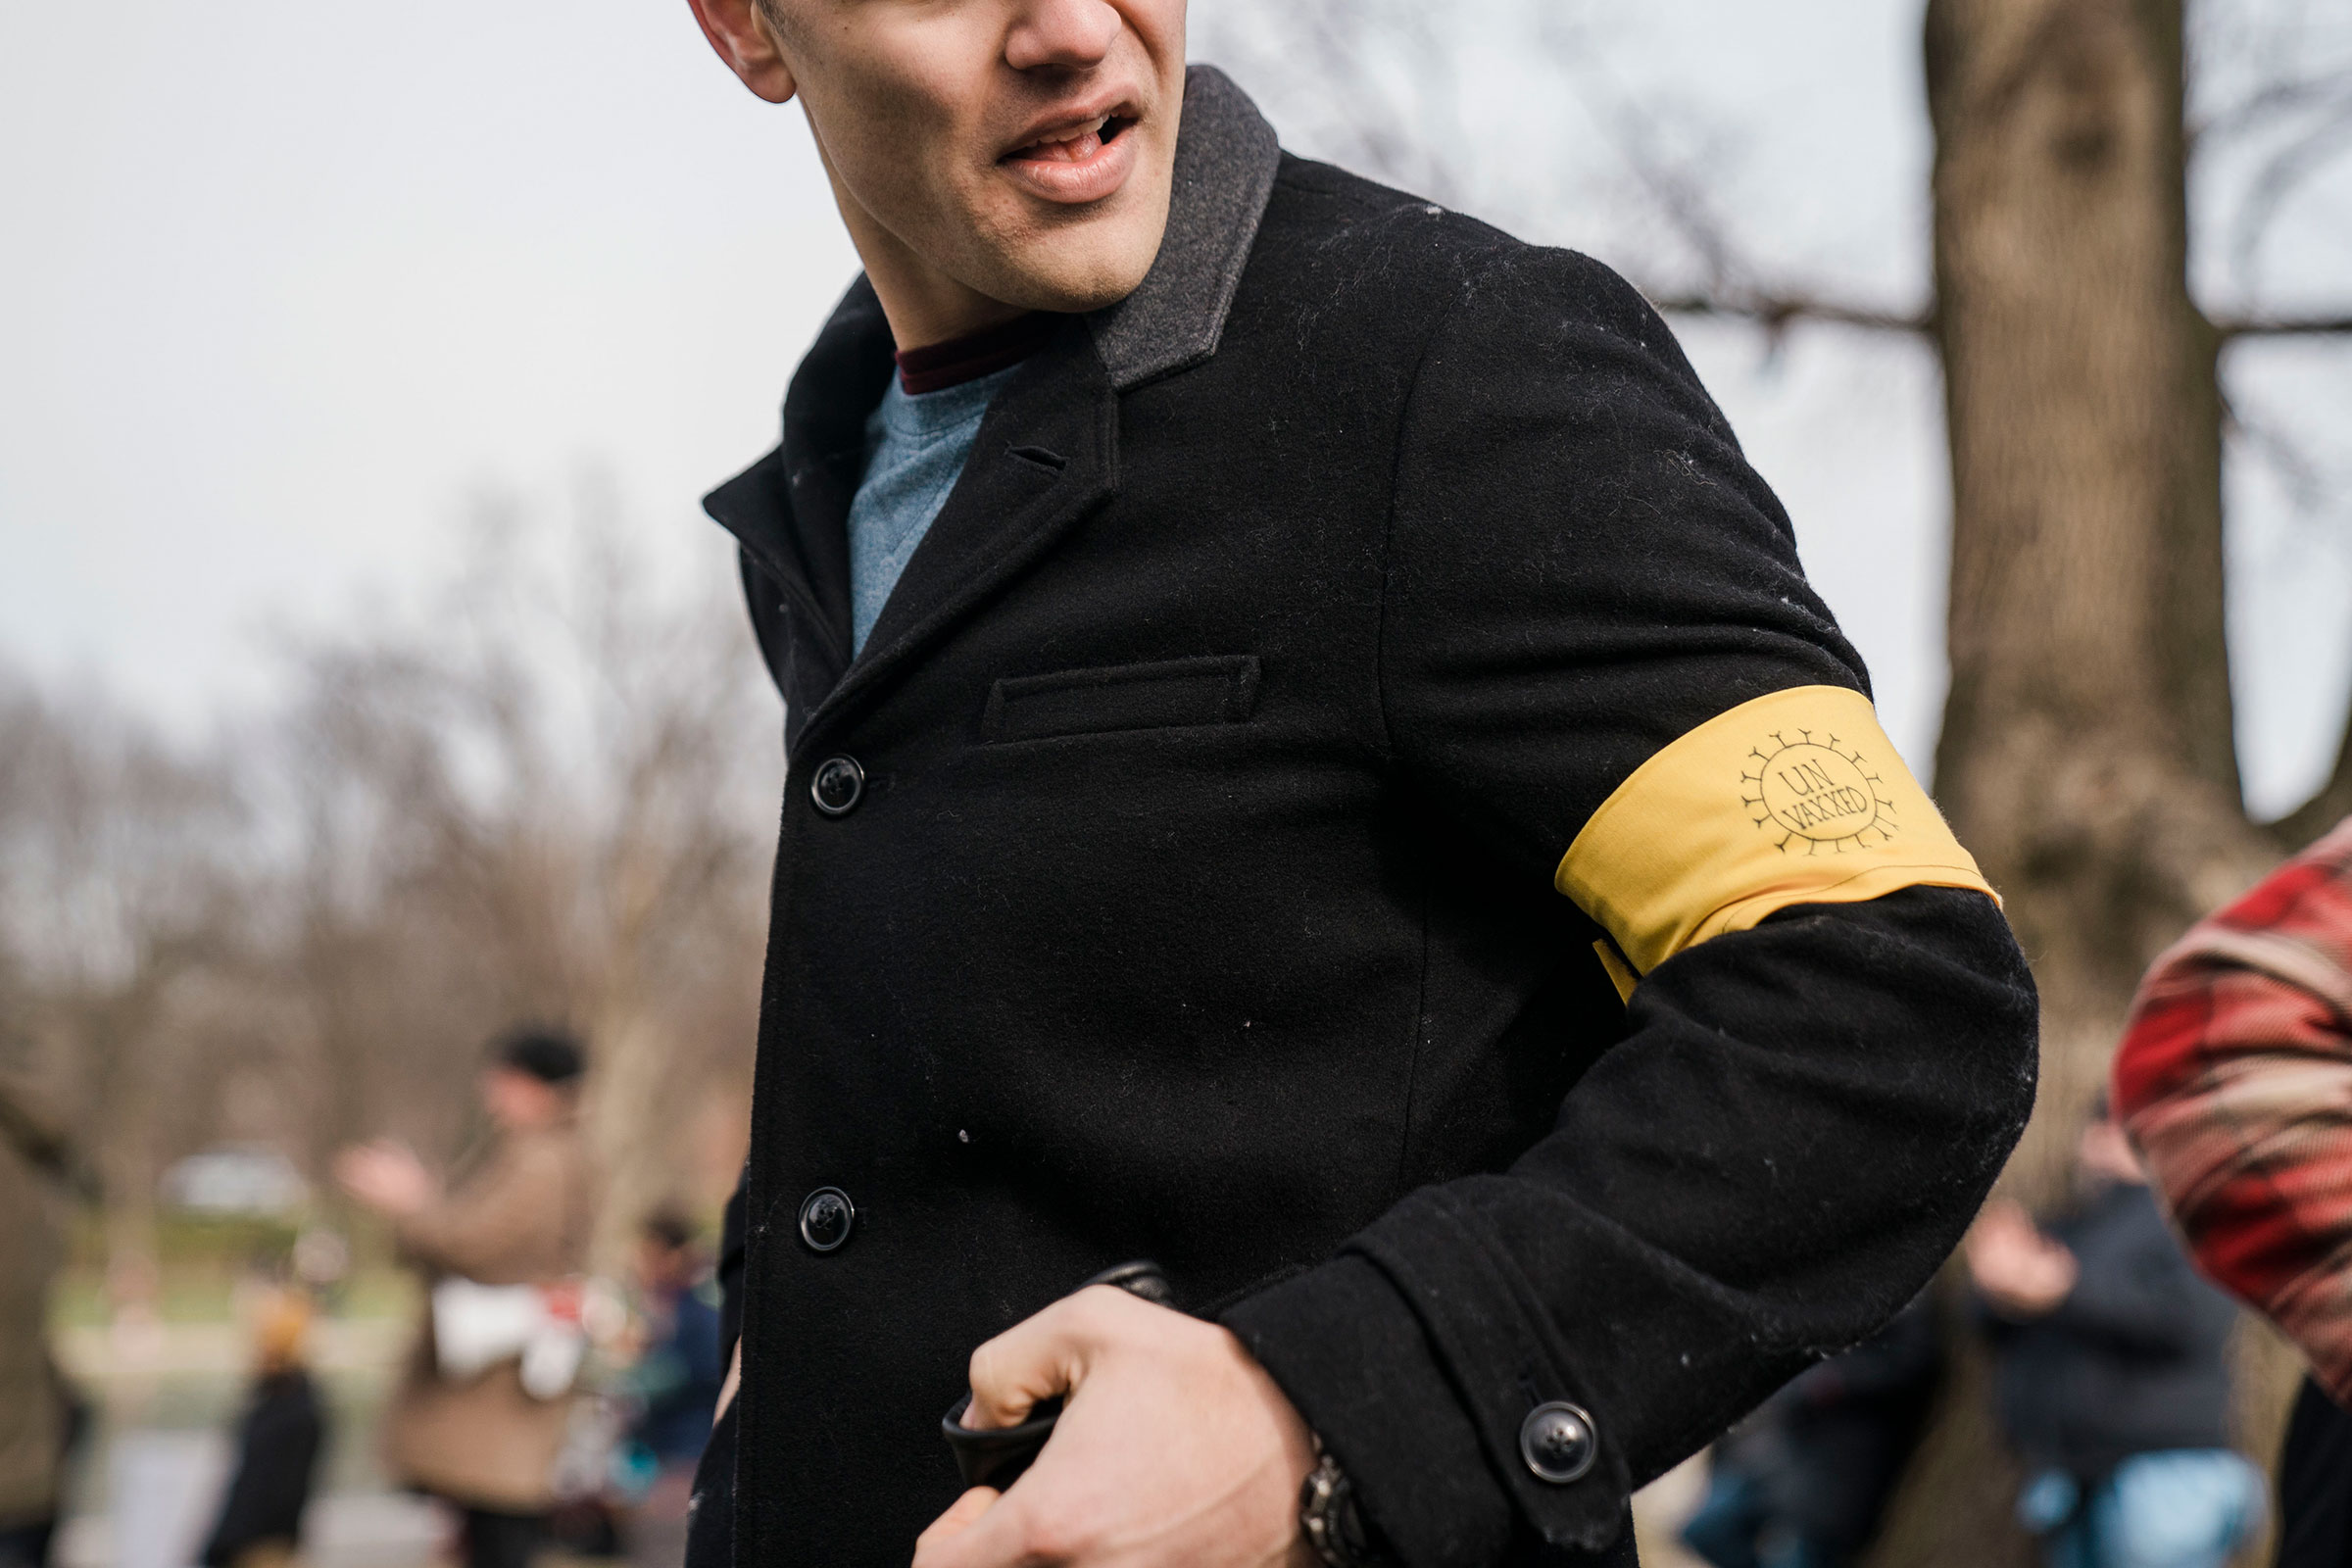 A man wears an Un-Vaccinated arm band at a Defeat the Mandates march. (Kent Nishimura—Los Angeles Times/Getty Images)